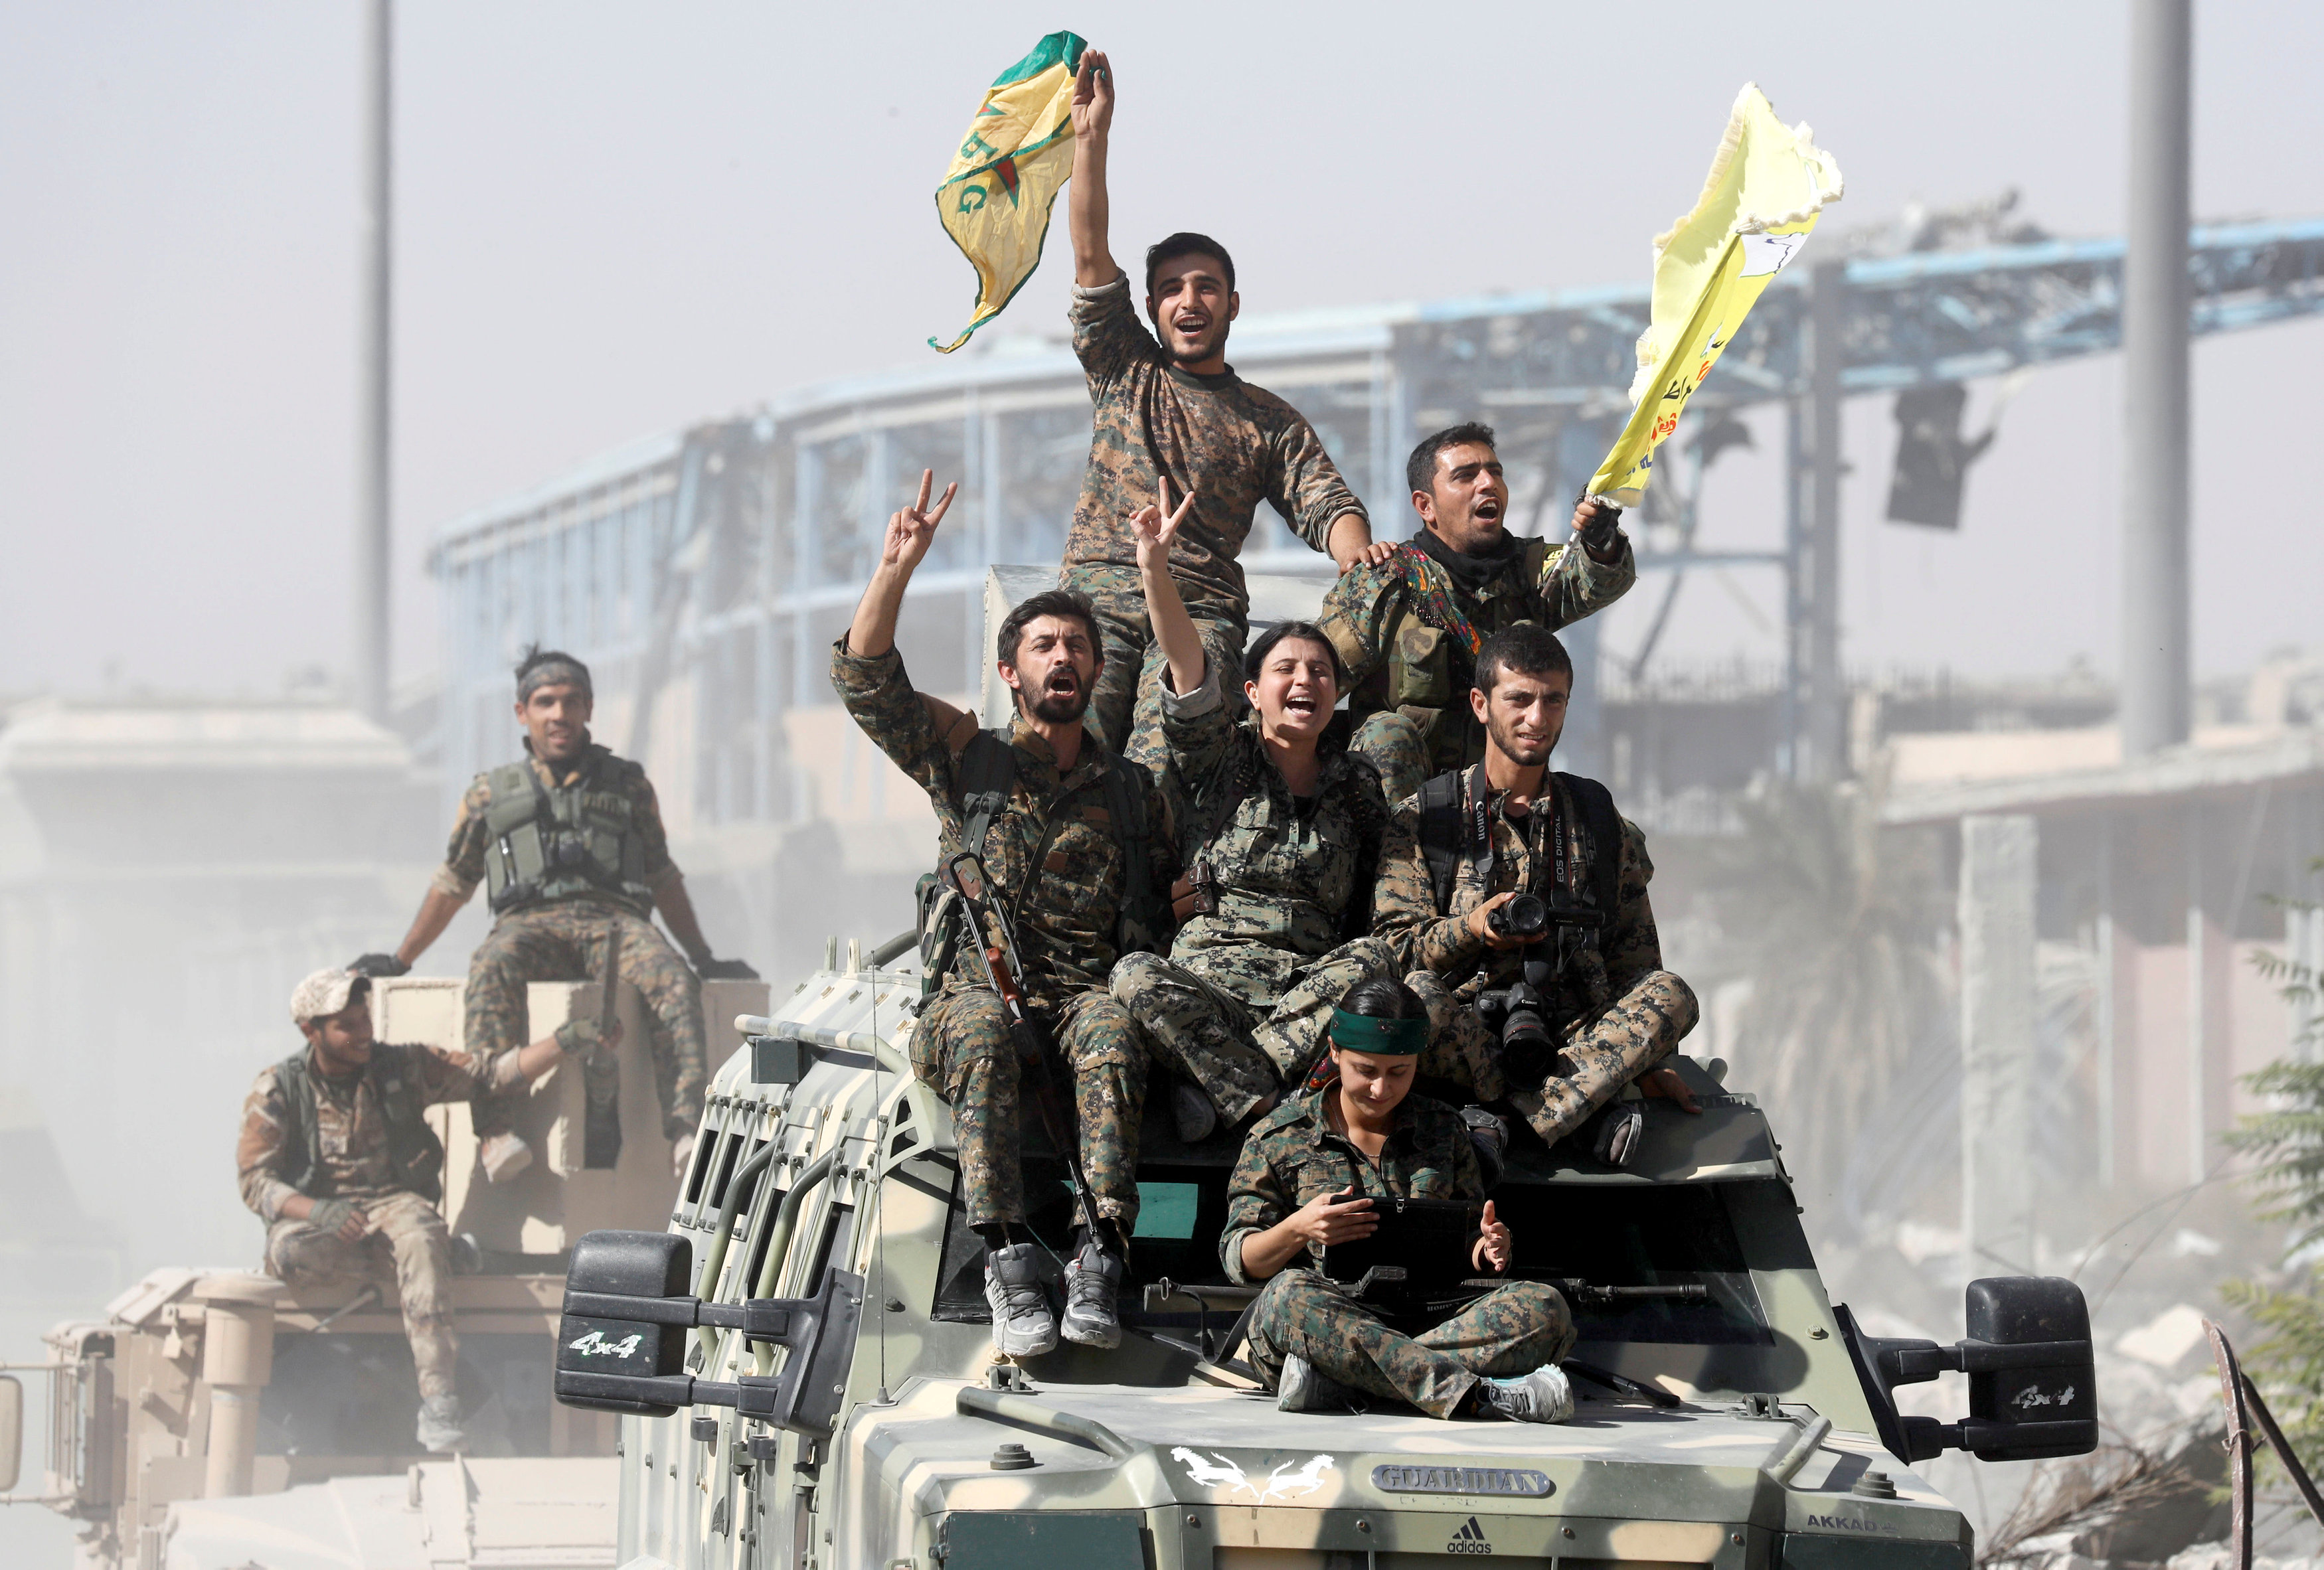 SDF fighters ride atop military vehicles as they celebrate victory in Raqqa